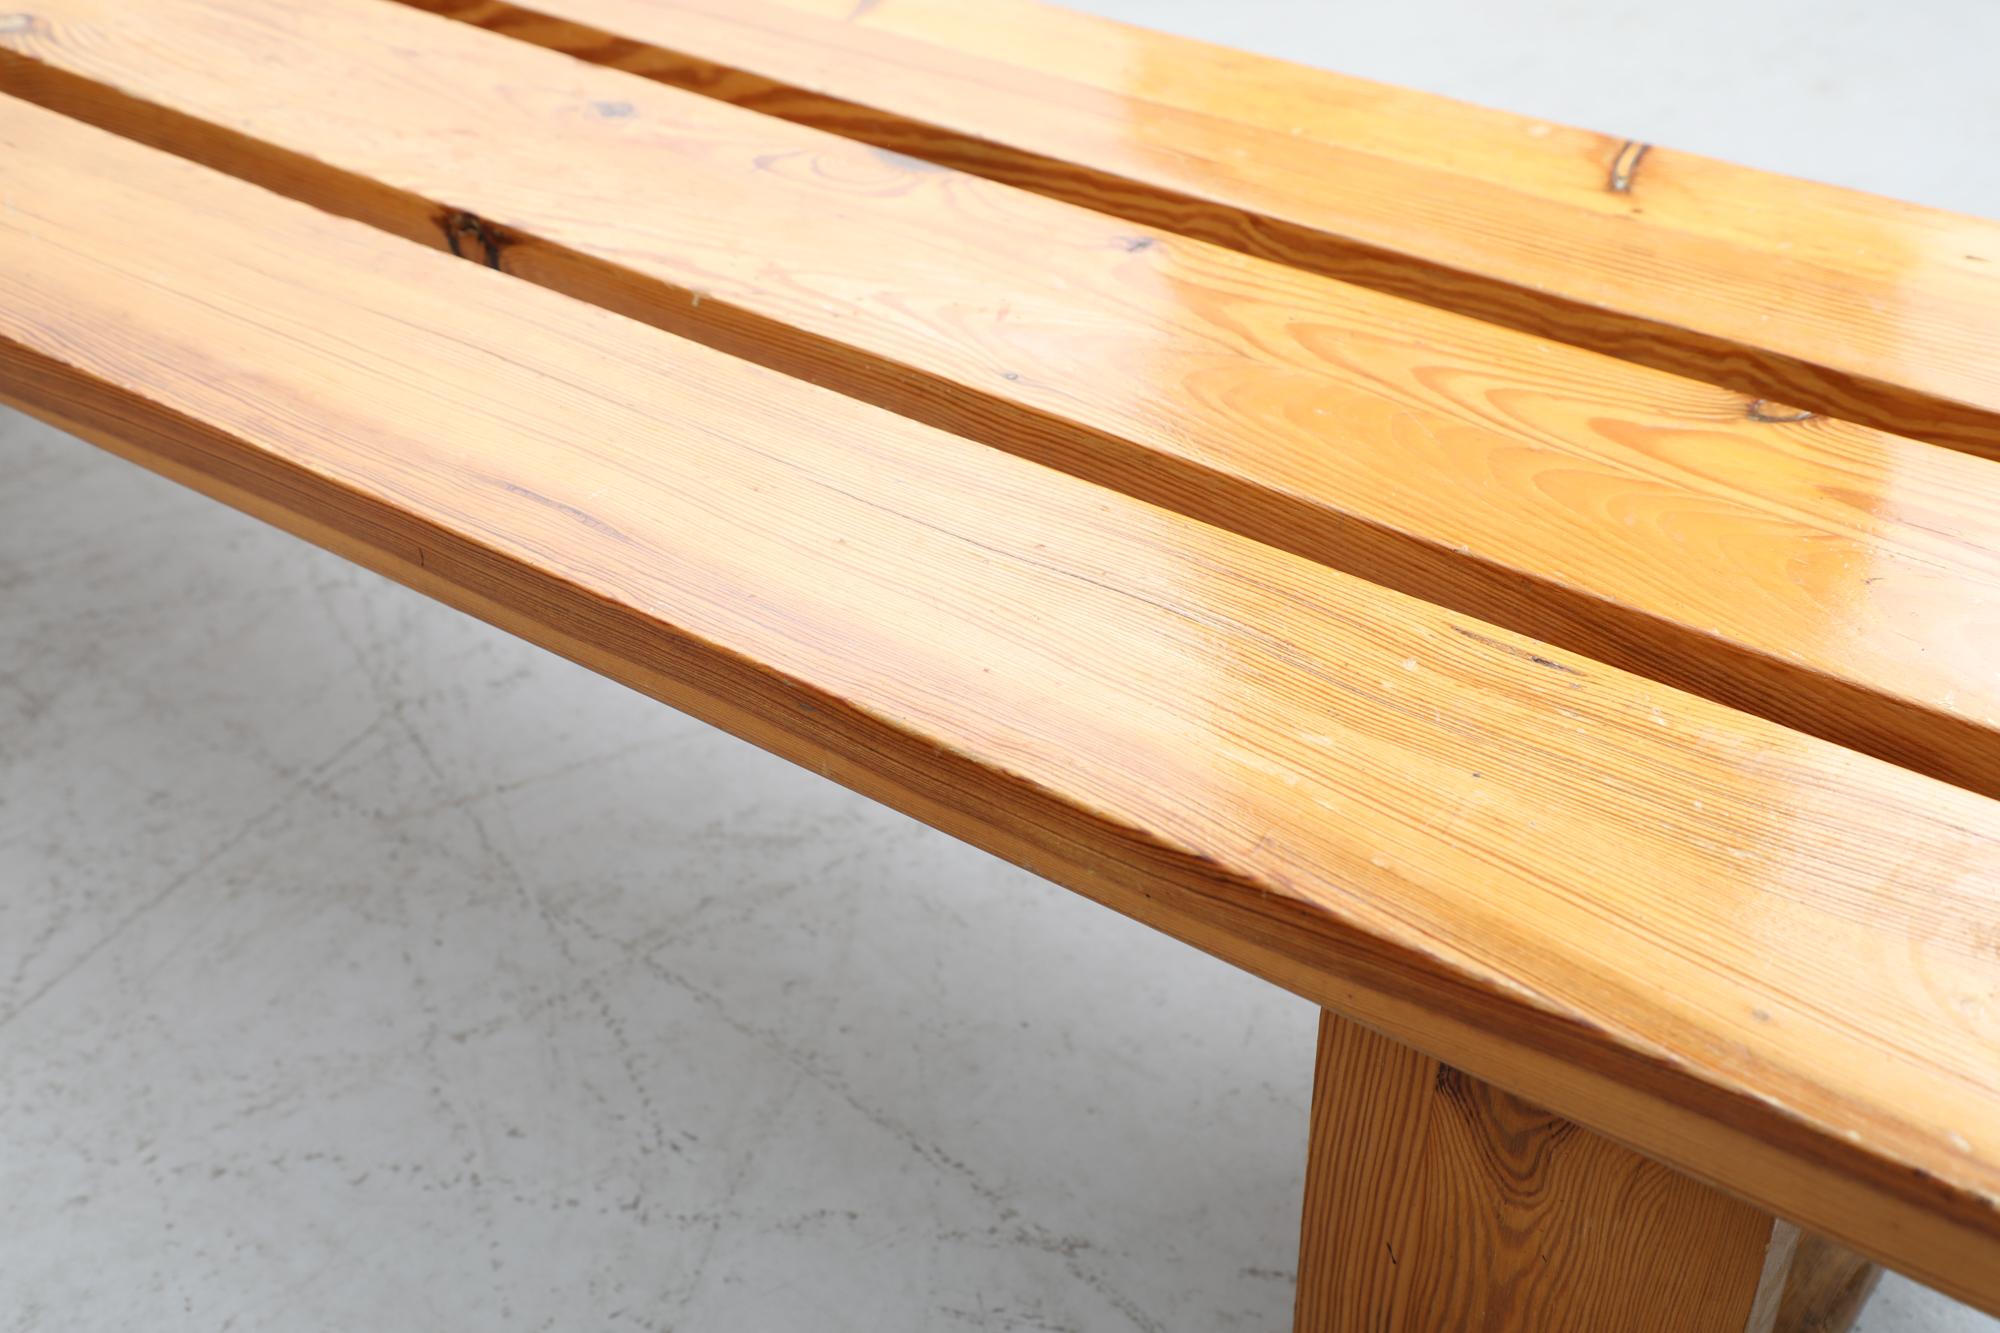 Ate van Apeldoorn Heavy Pine Slat Benches w/ Square Legs & Box Joints For Sale 14